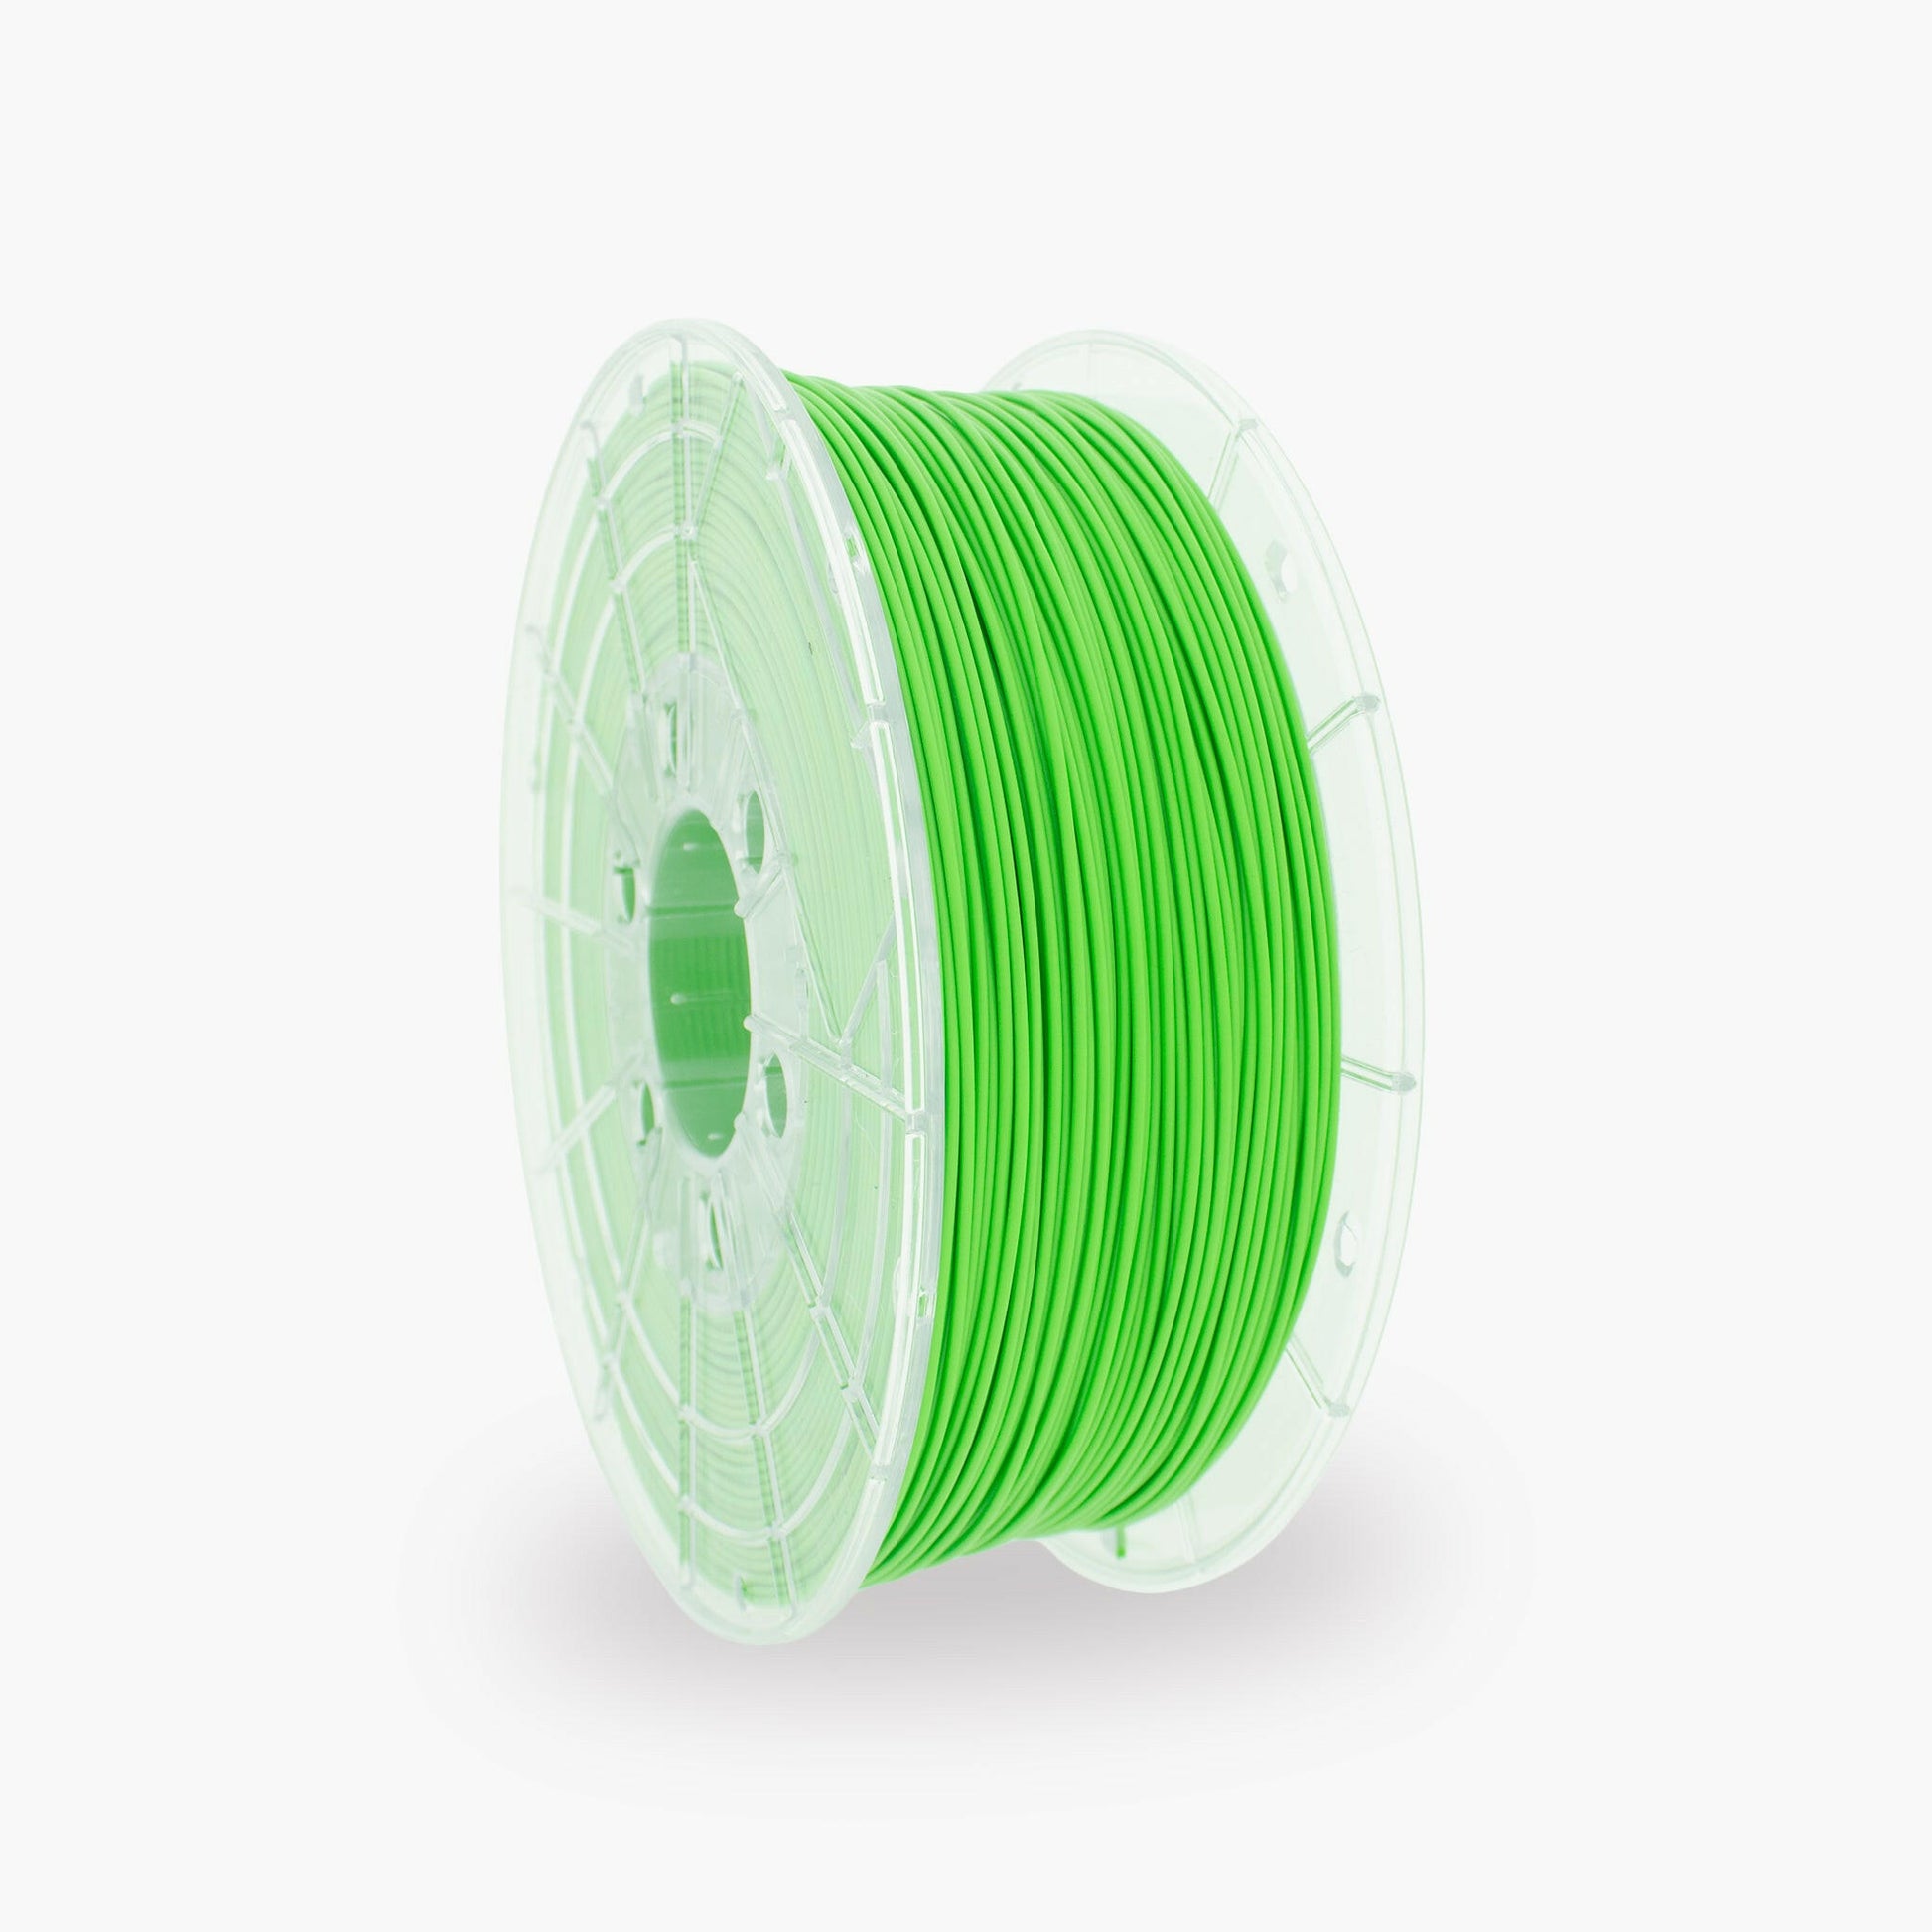 Apple Green PLA 3D Printer Filament with a diameter of 1.75mm on a 1KG Spool.